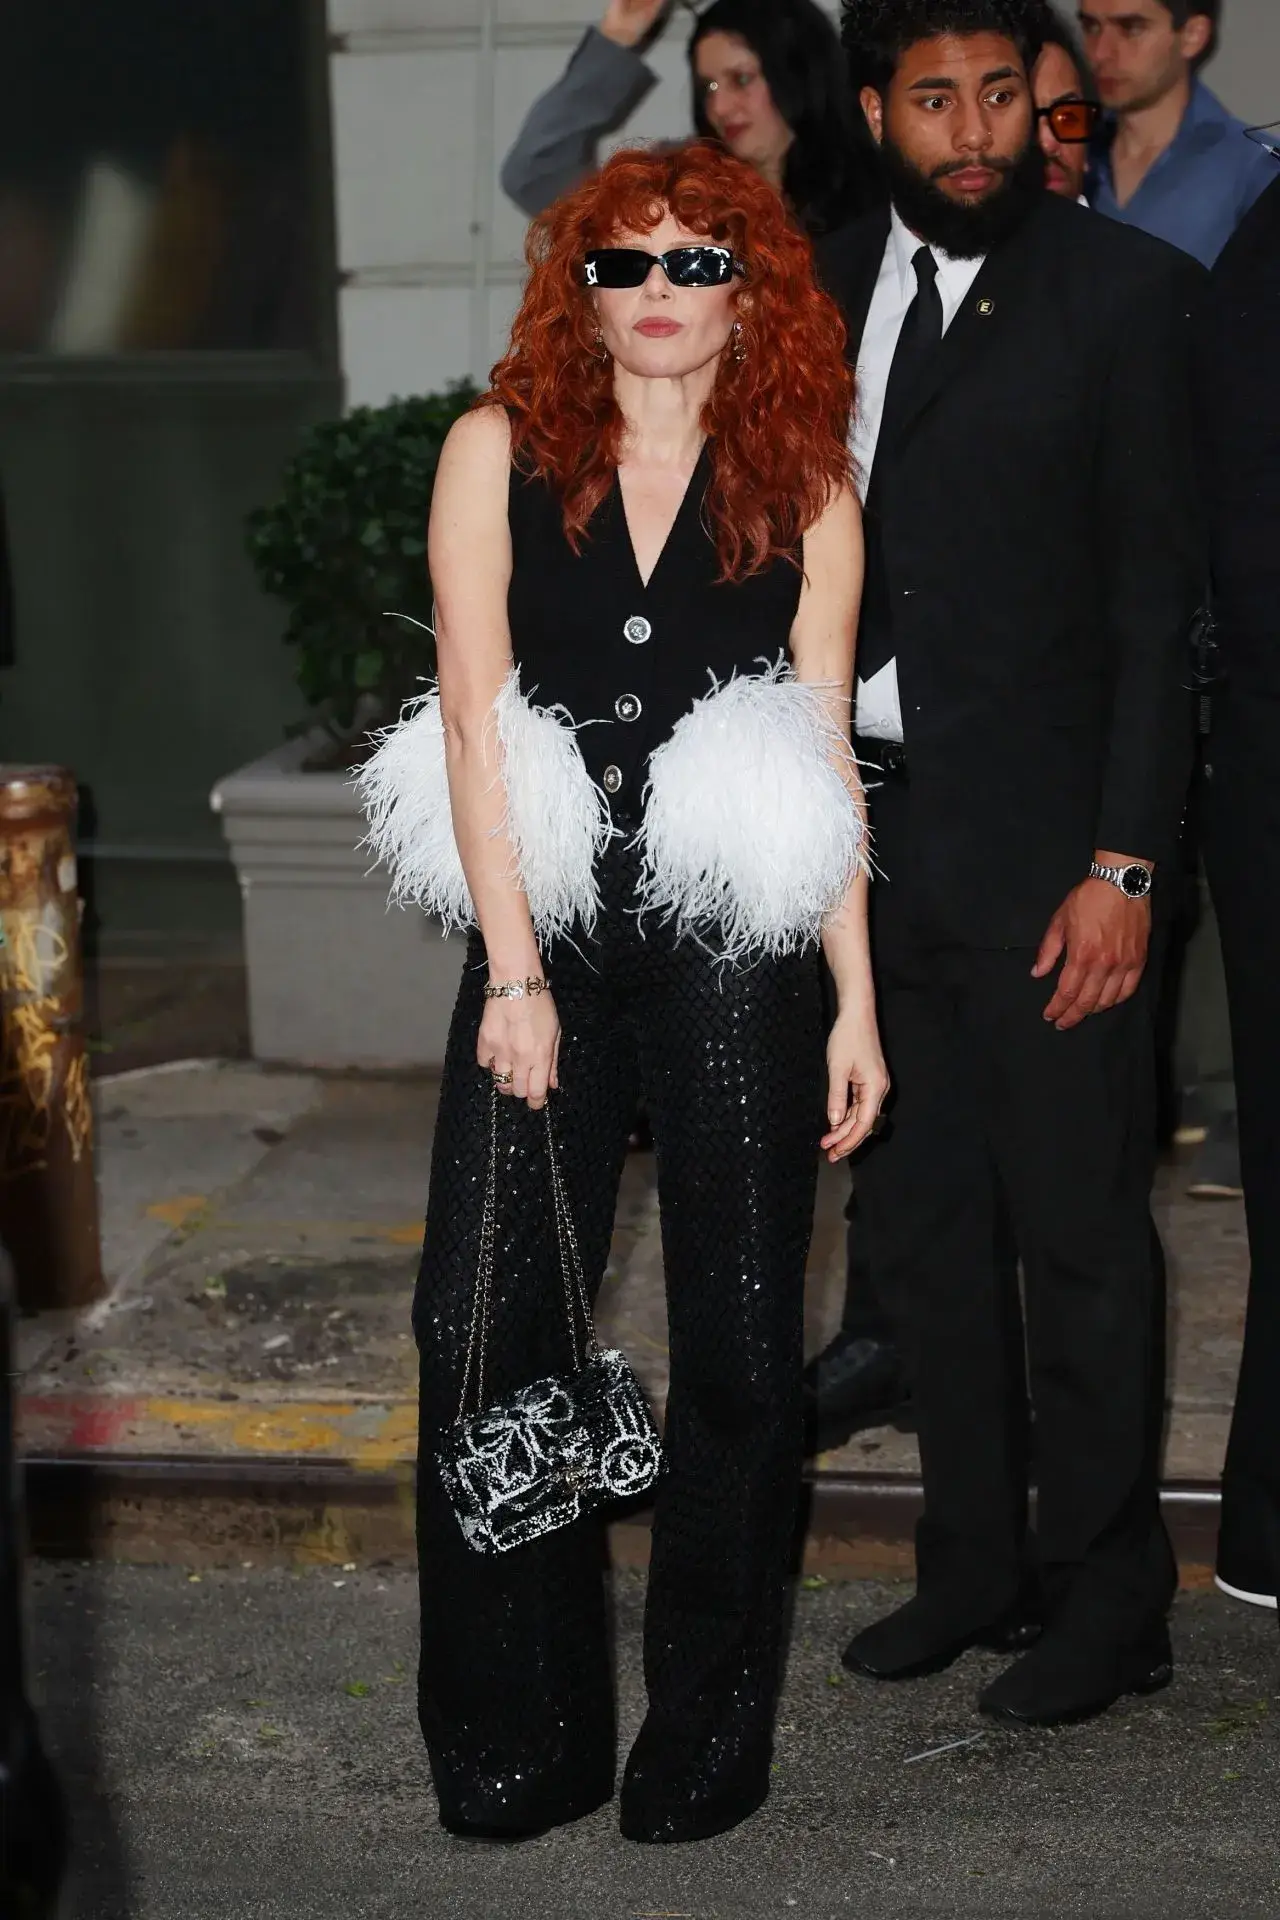 NATASHA LYONNE AT THE CHANEL TRIBECA FESTIVAL ARTISTS DINNER AT THE ODEON IN NEW YORK 3